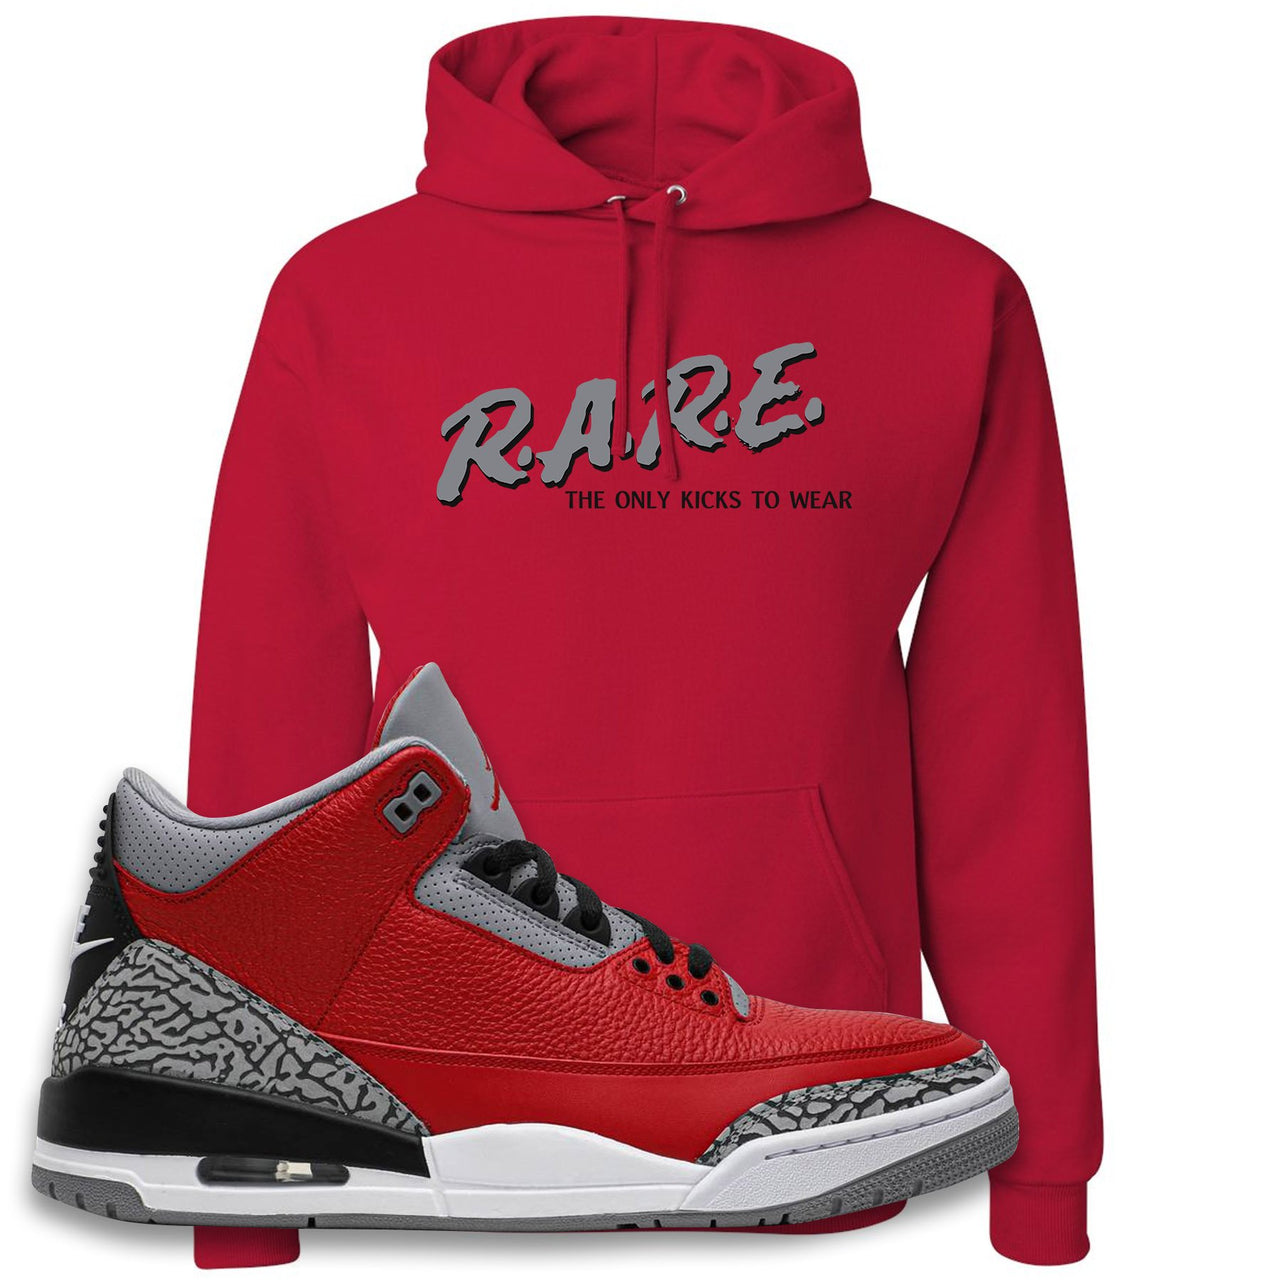 Jordan 3 Red Cement Chicago All-Star Sneaker True Red Pullover Hoodie | Hoodie to match Jordan 3 All Star Red Cement Shoes | Rare